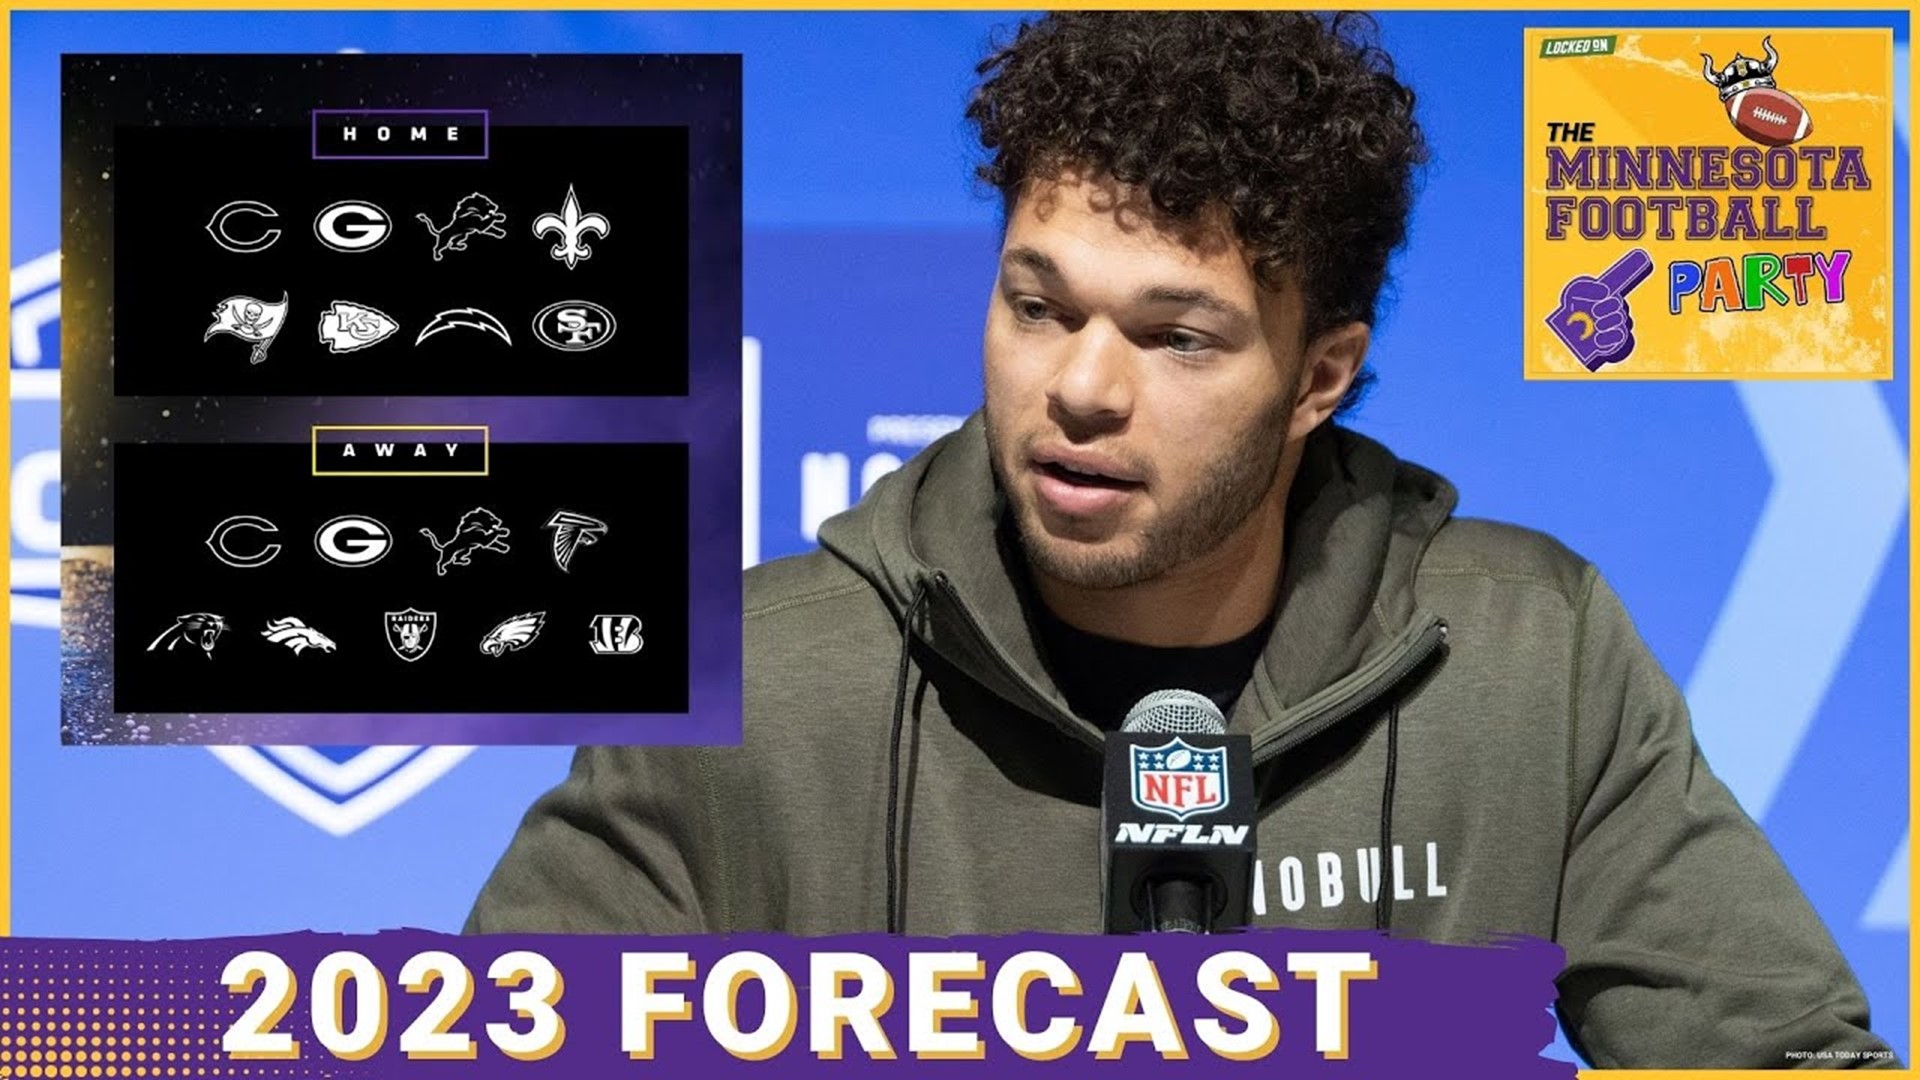 Are The Minnesota Vikings Prepared For Gauntlet Schedule in 2023